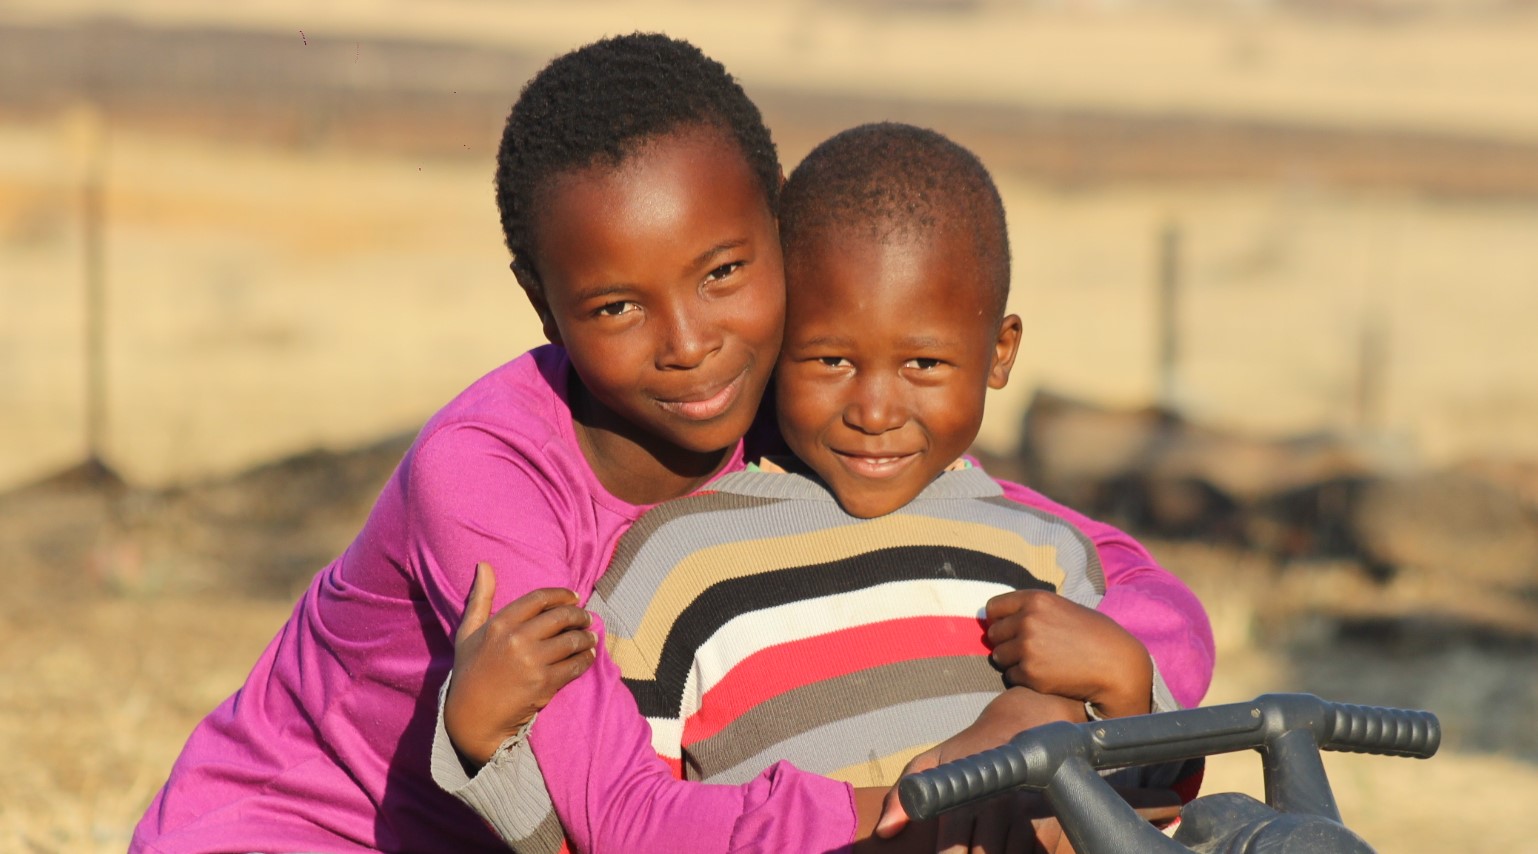 Children from South Africa, Amahle and Siyanda,